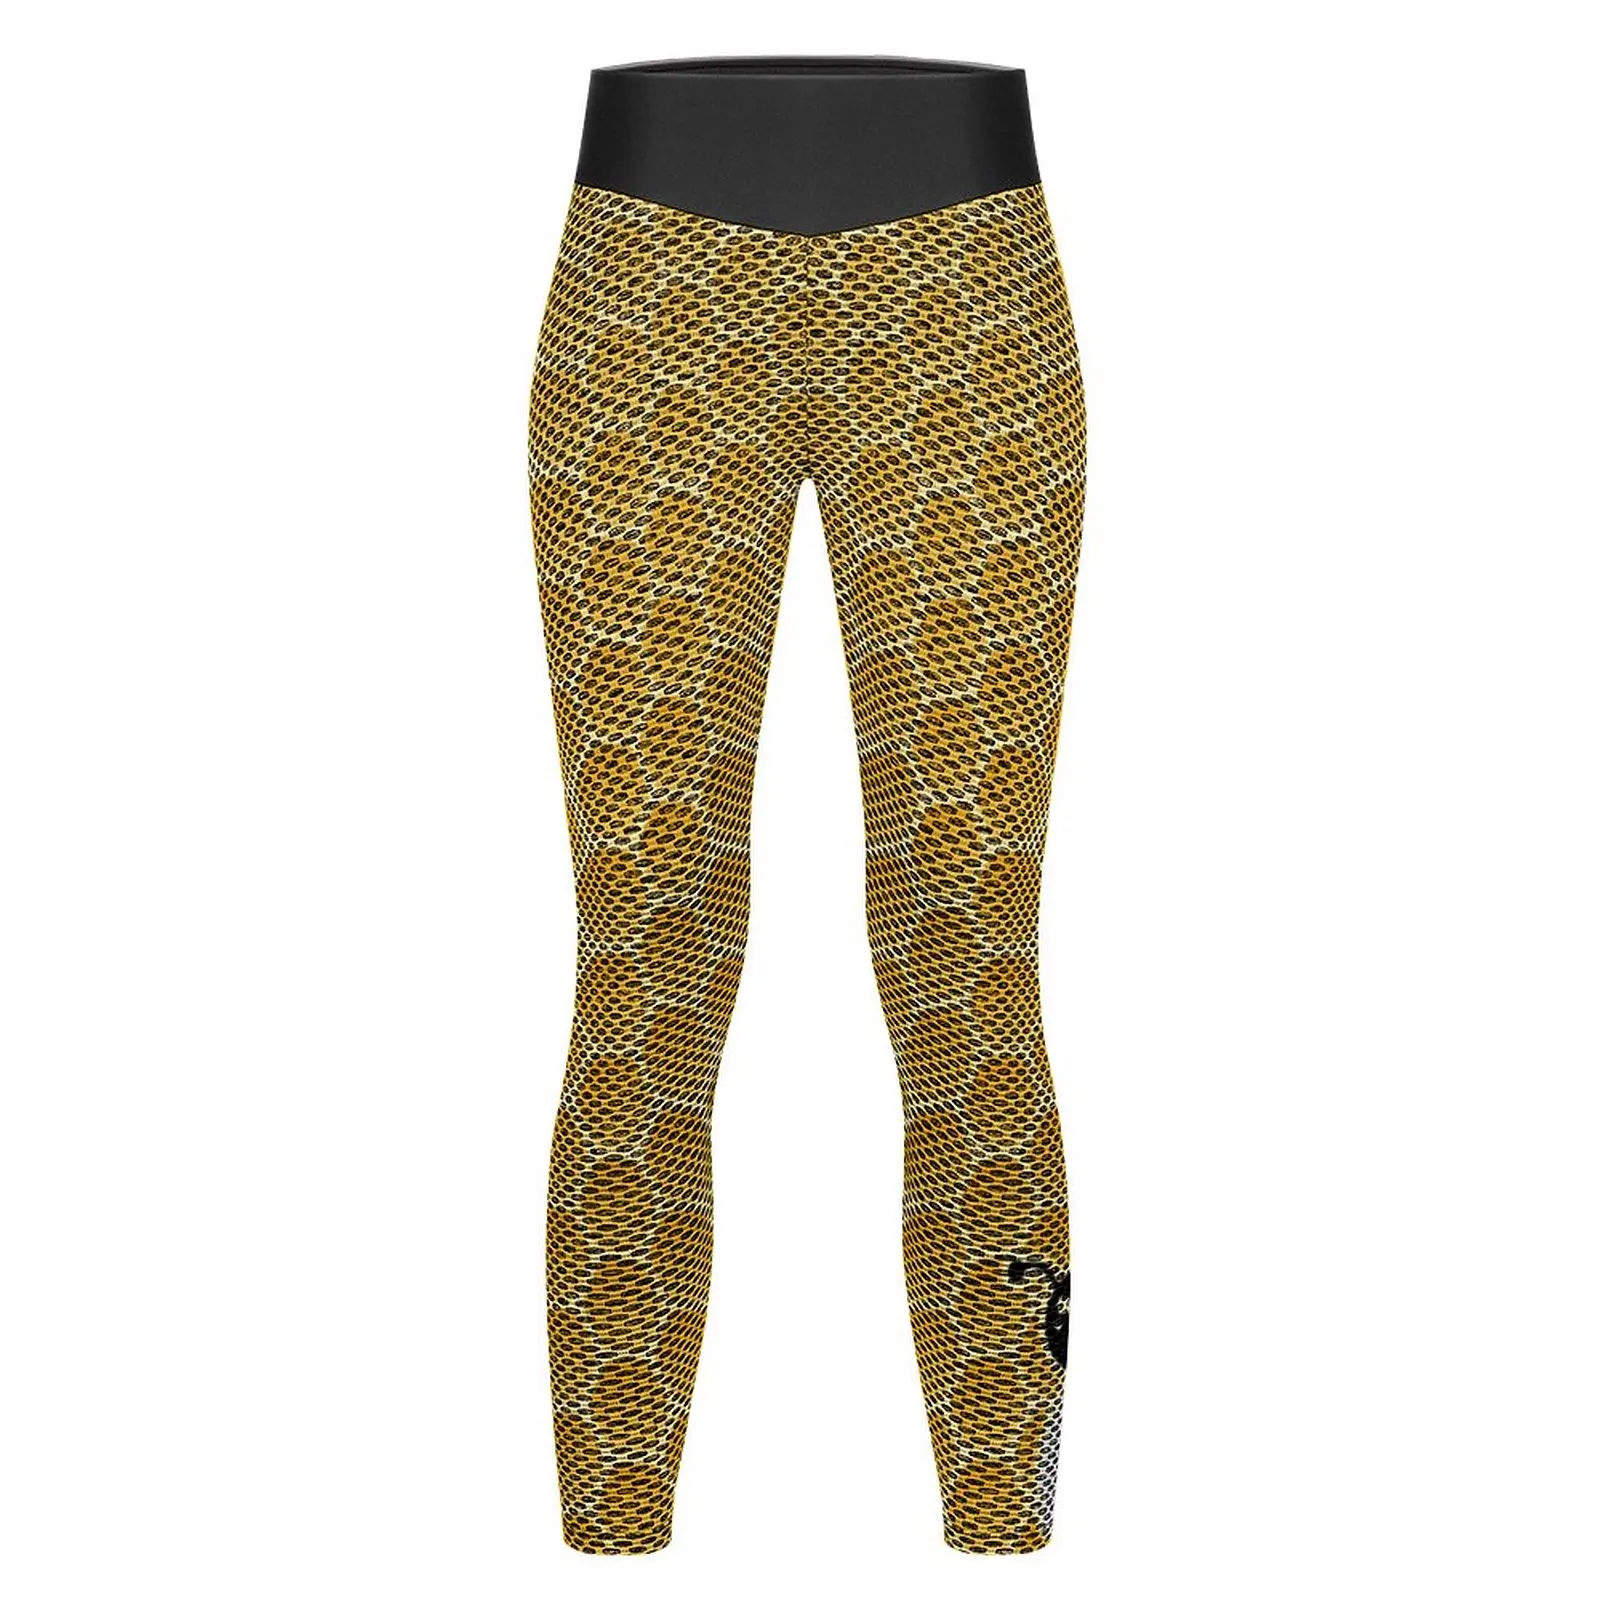 Bumble Bees Leggings Cute Honeycomb Print Work Out Yoga Pants Female Push Up Novelty Leggins Sexy Seamless Graphic Sports Tights images - 3